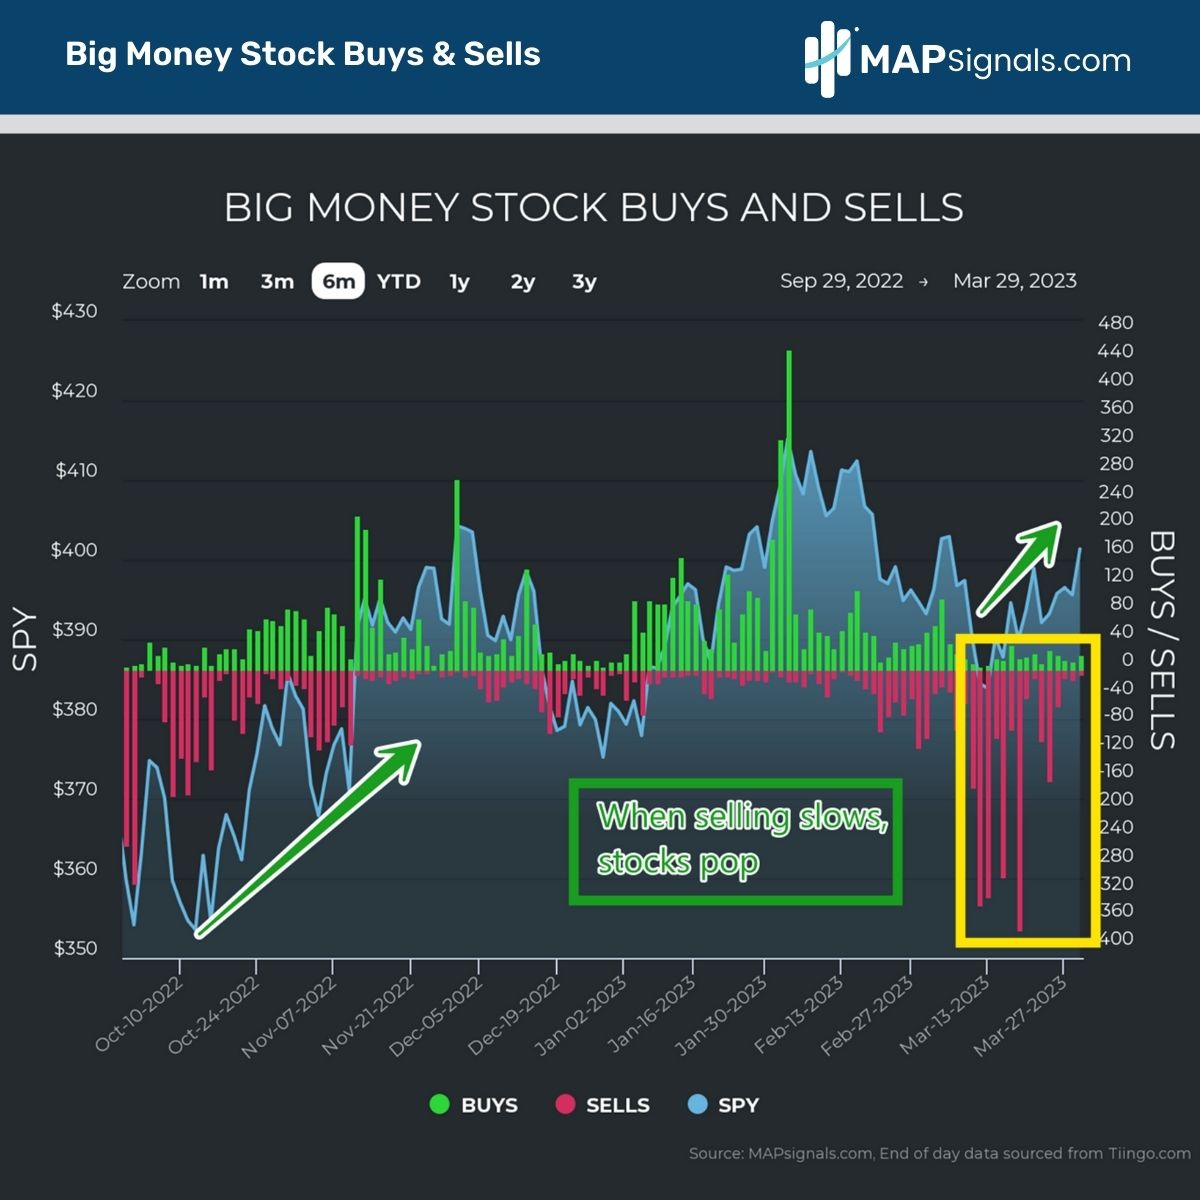 Stocks pop up when selling slows | MAPsignals